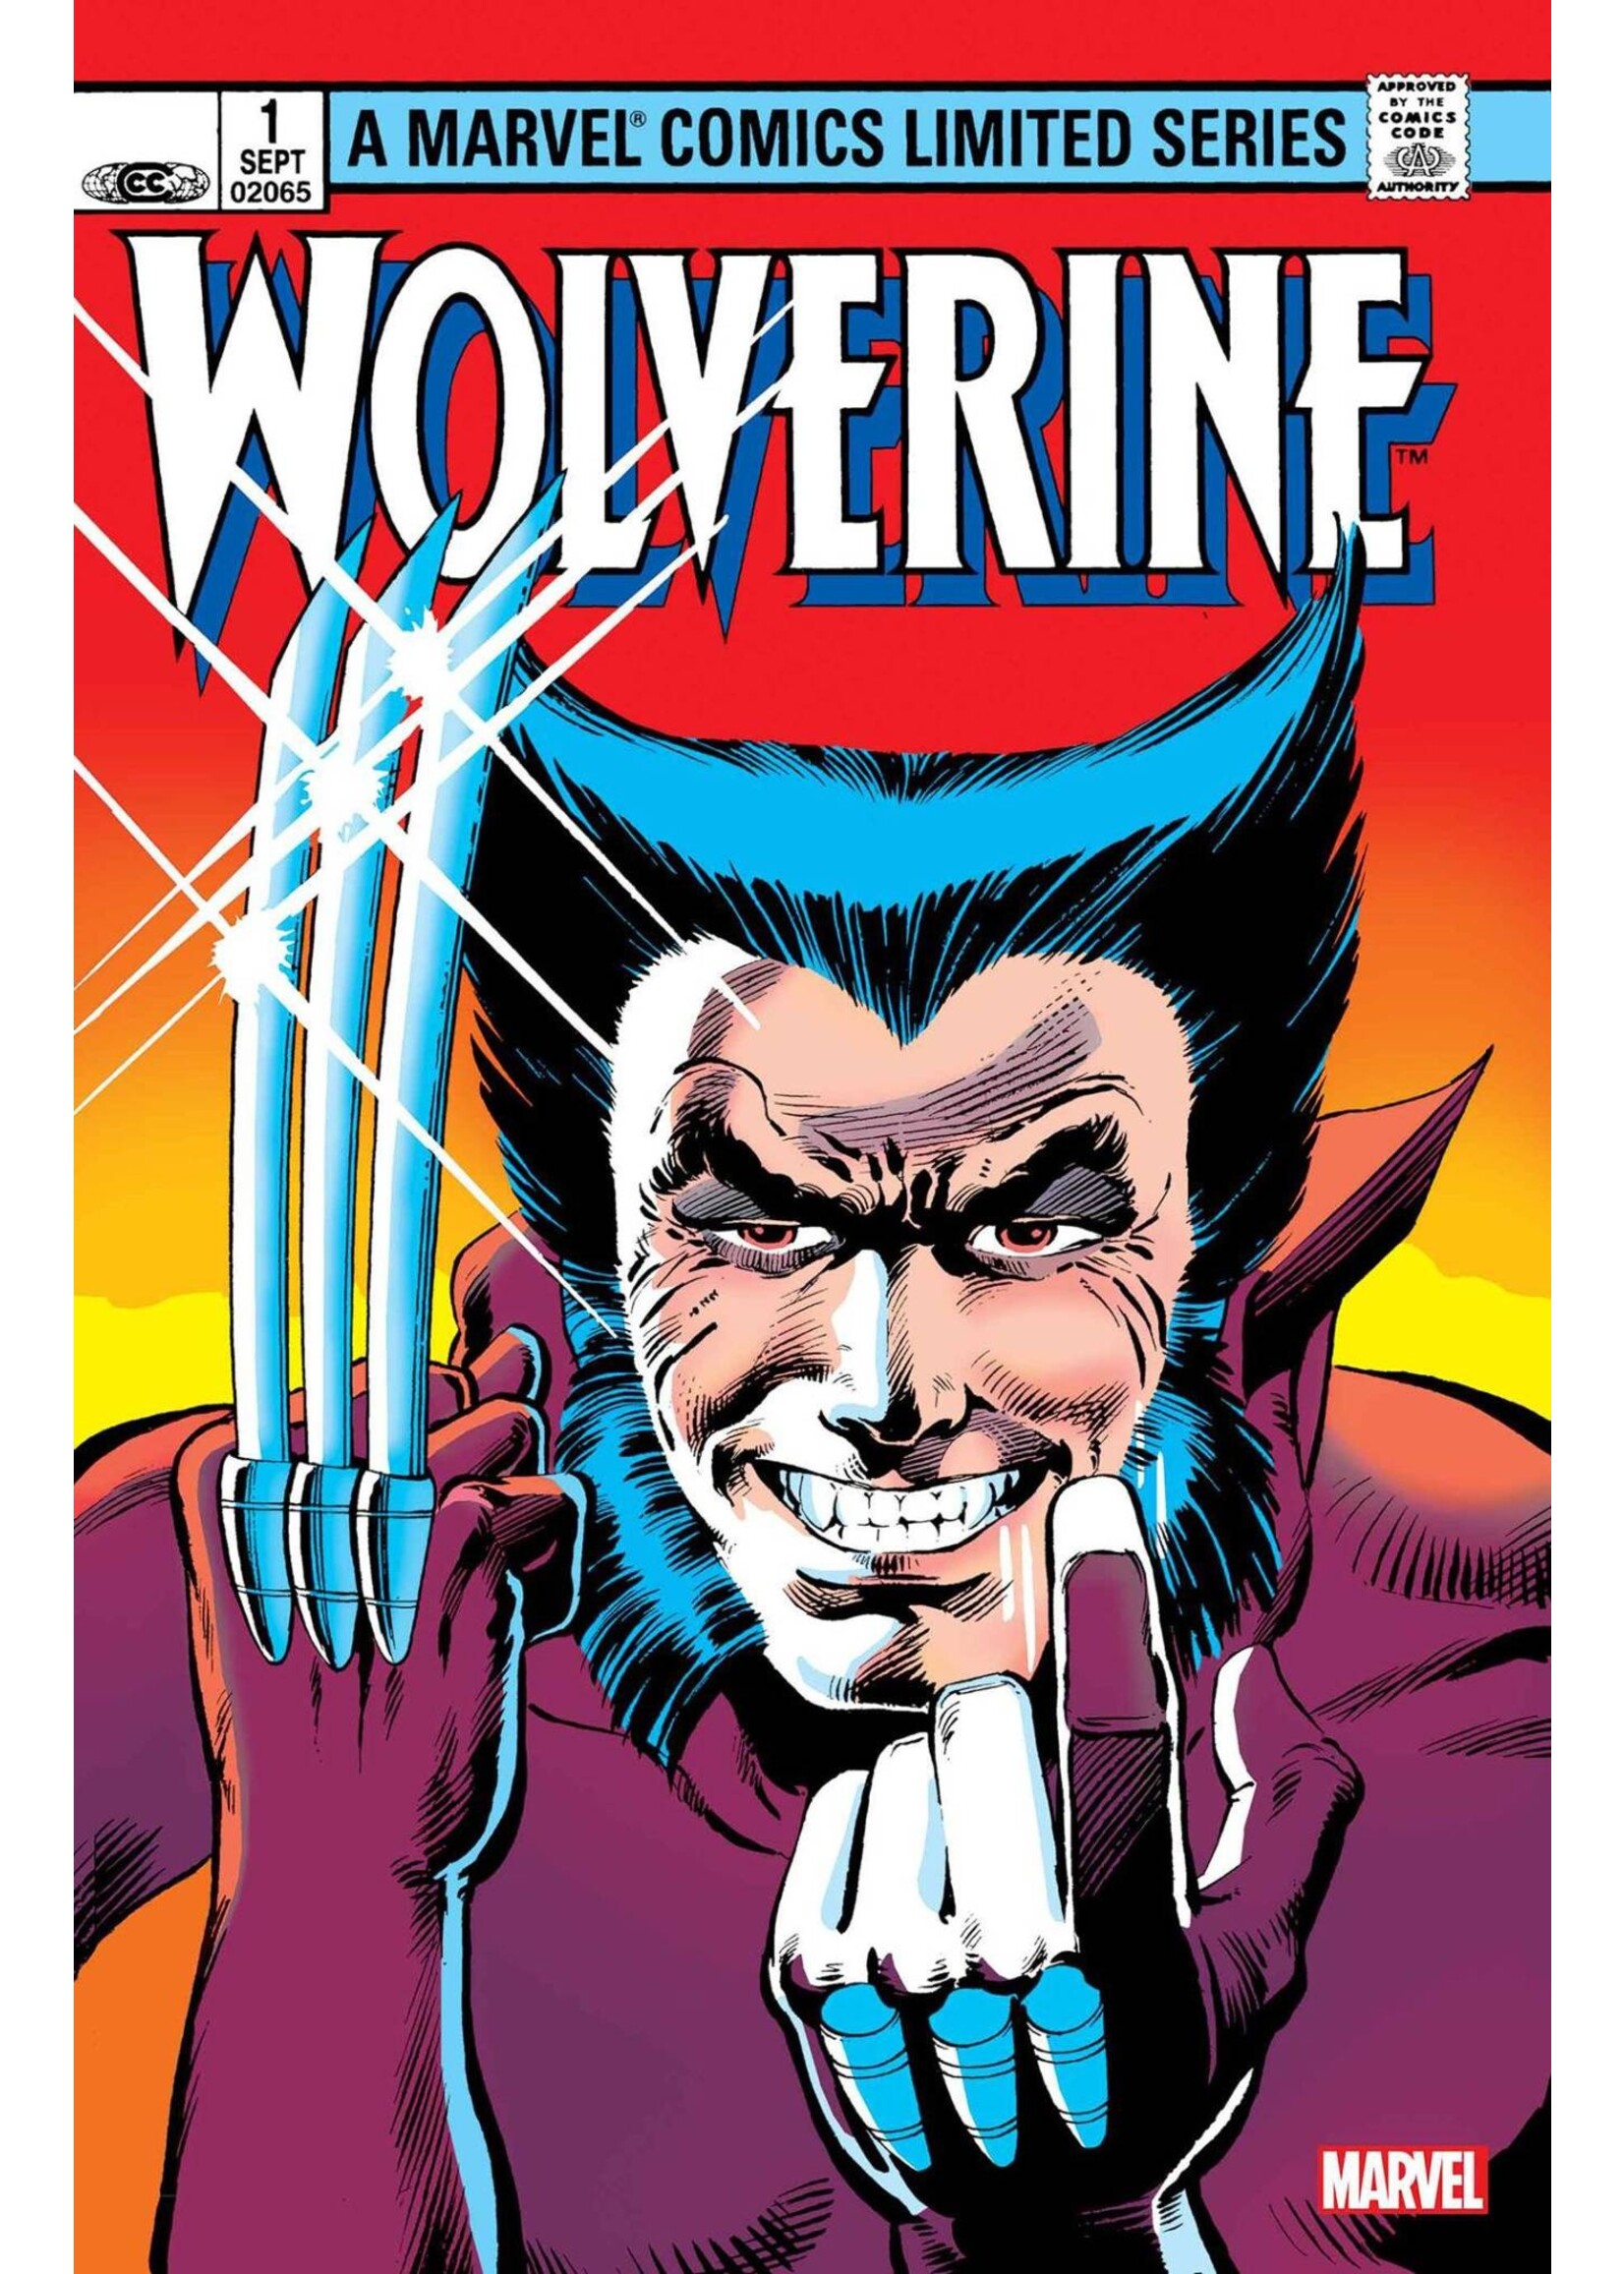 WOLVERINE BY CLAREMONT AND MILLER FACSIMILE EDITION POSTER